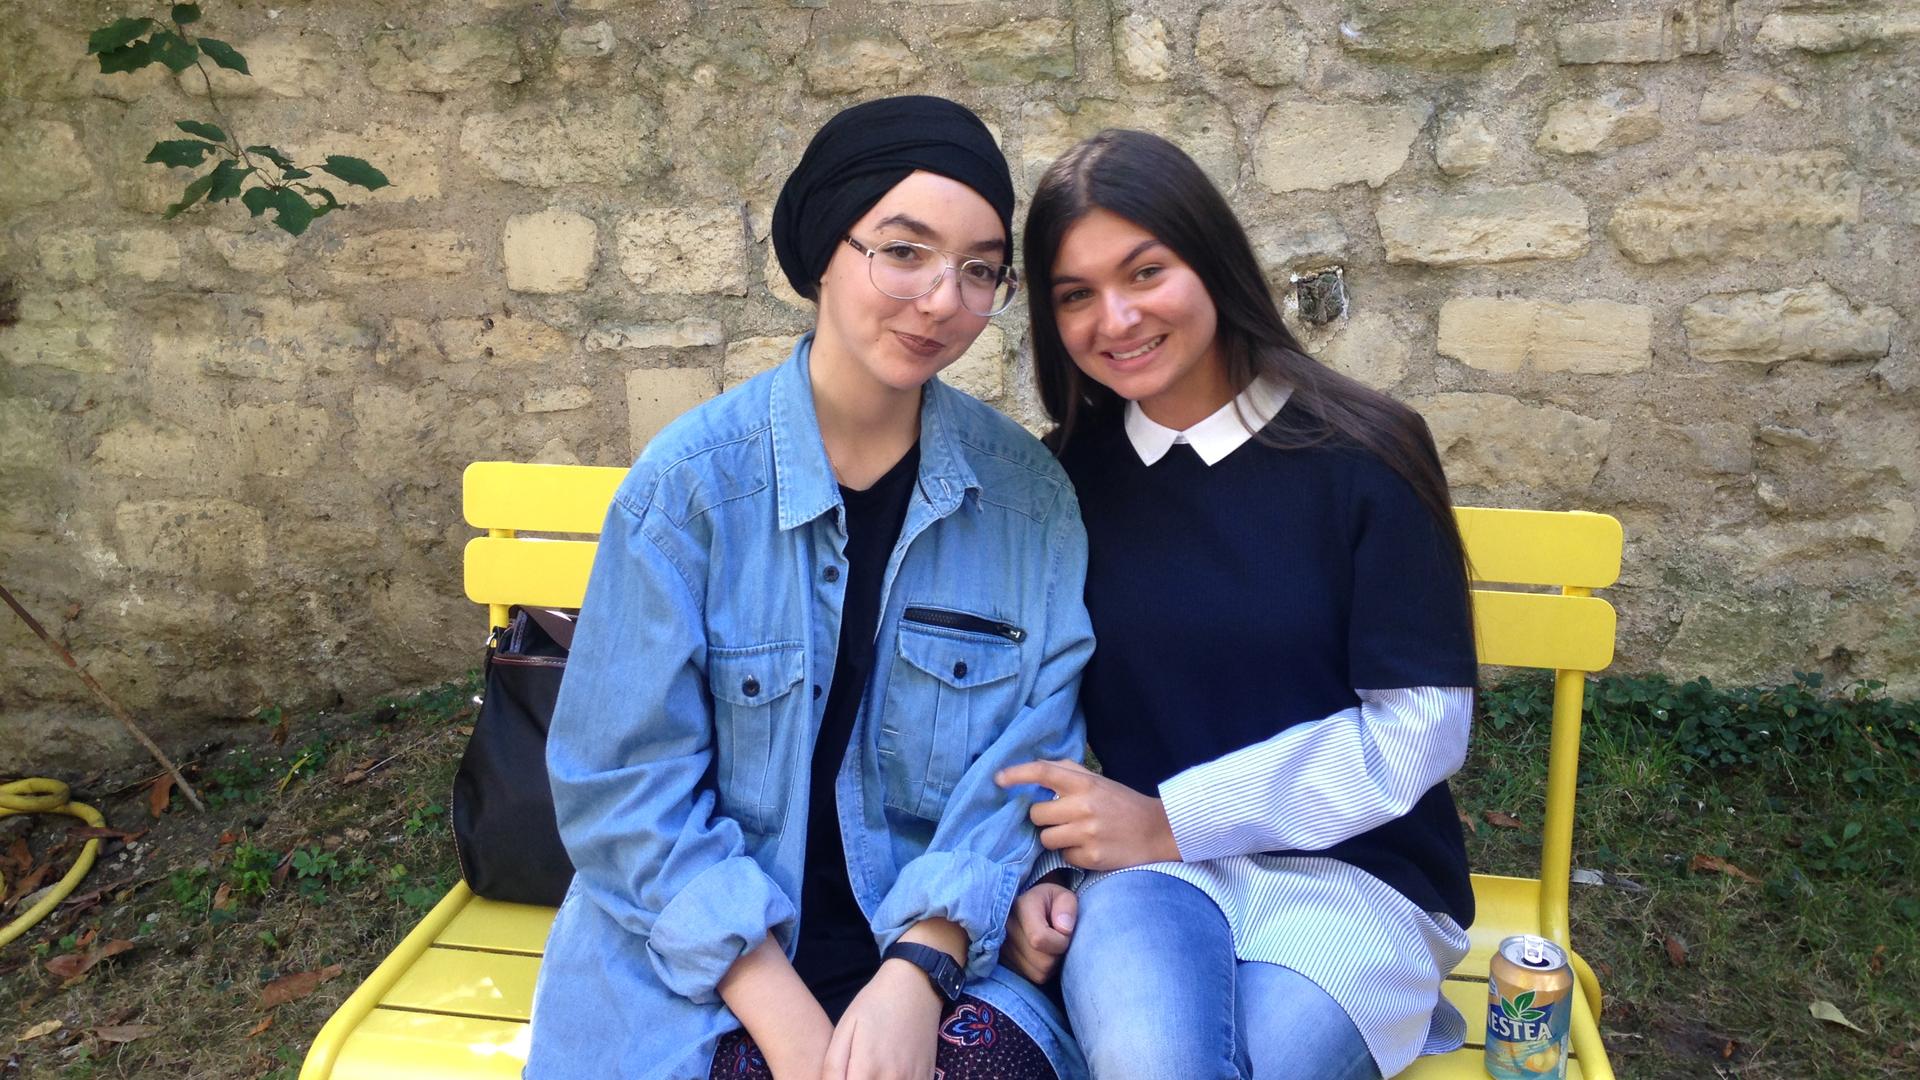 Sirine Bidjou (right) and Hanifa Benrahou (left) are both students at Sciences Po, which they entered through the CEP program. It's France's answer to American-style affirmative action.